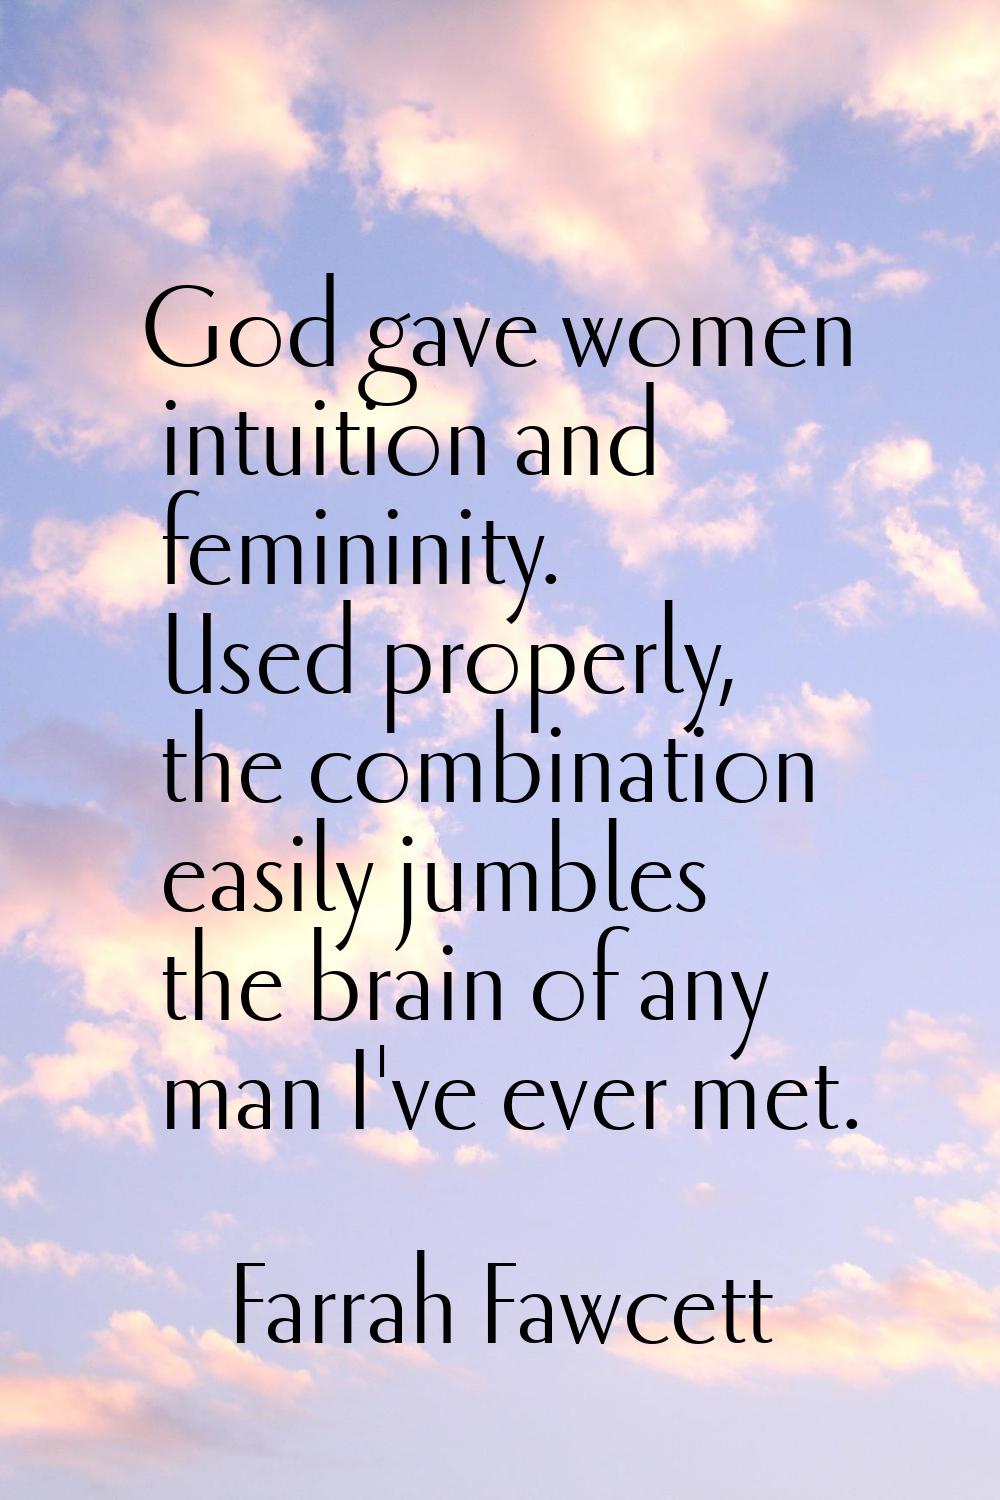 God gave women intuition and femininity. Used properly, the combination easily jumbles the brain of